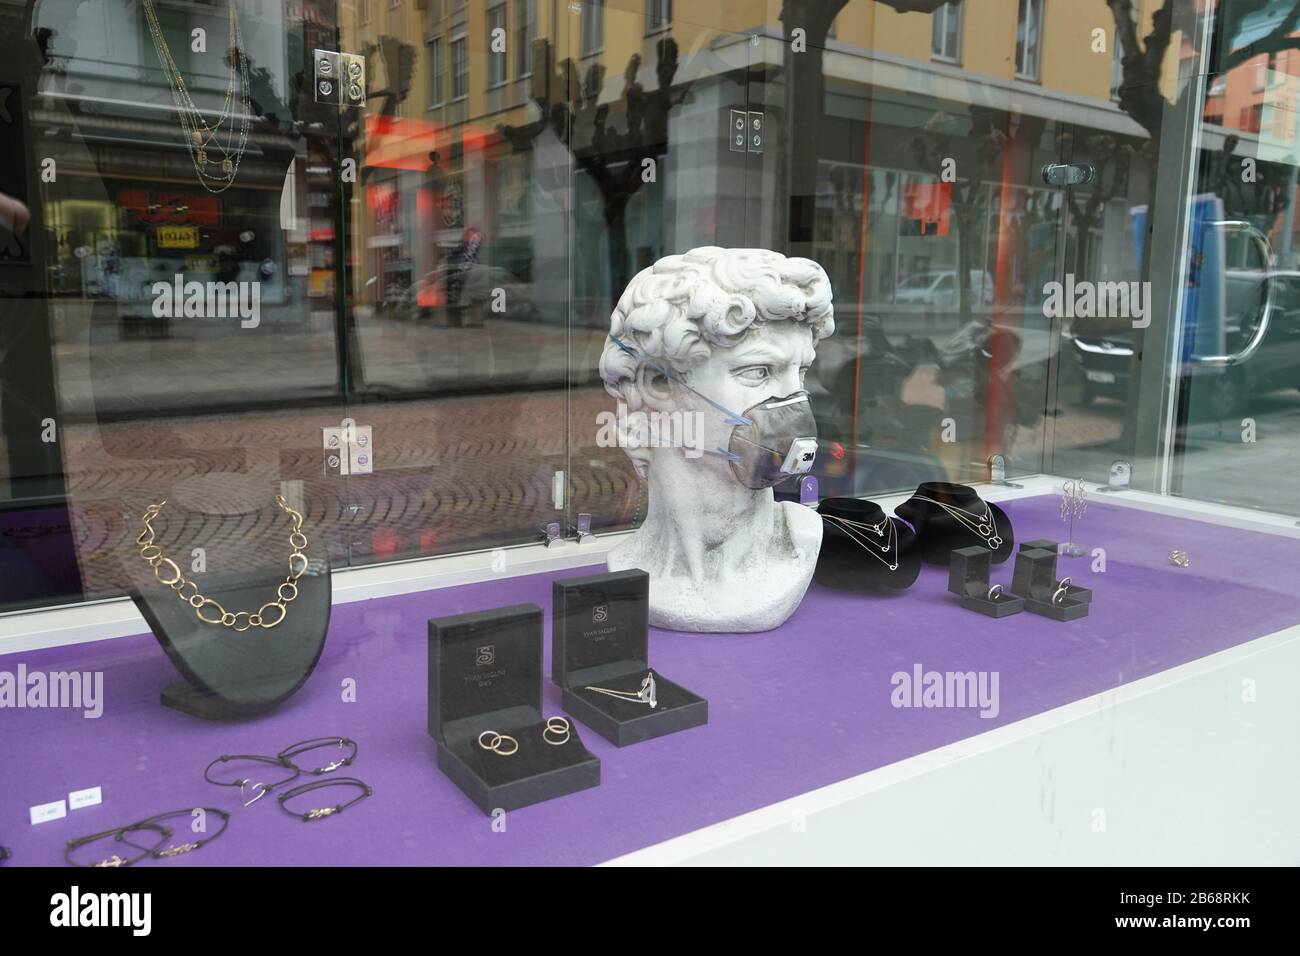 Bellinzona, Switzerland. 10th Mar, 2020. In a shop window of a jewellery  shop there is a replica of the head of Michelangelo's sculpture "David"  with a mouthguard. Bellinzona, the capital of the